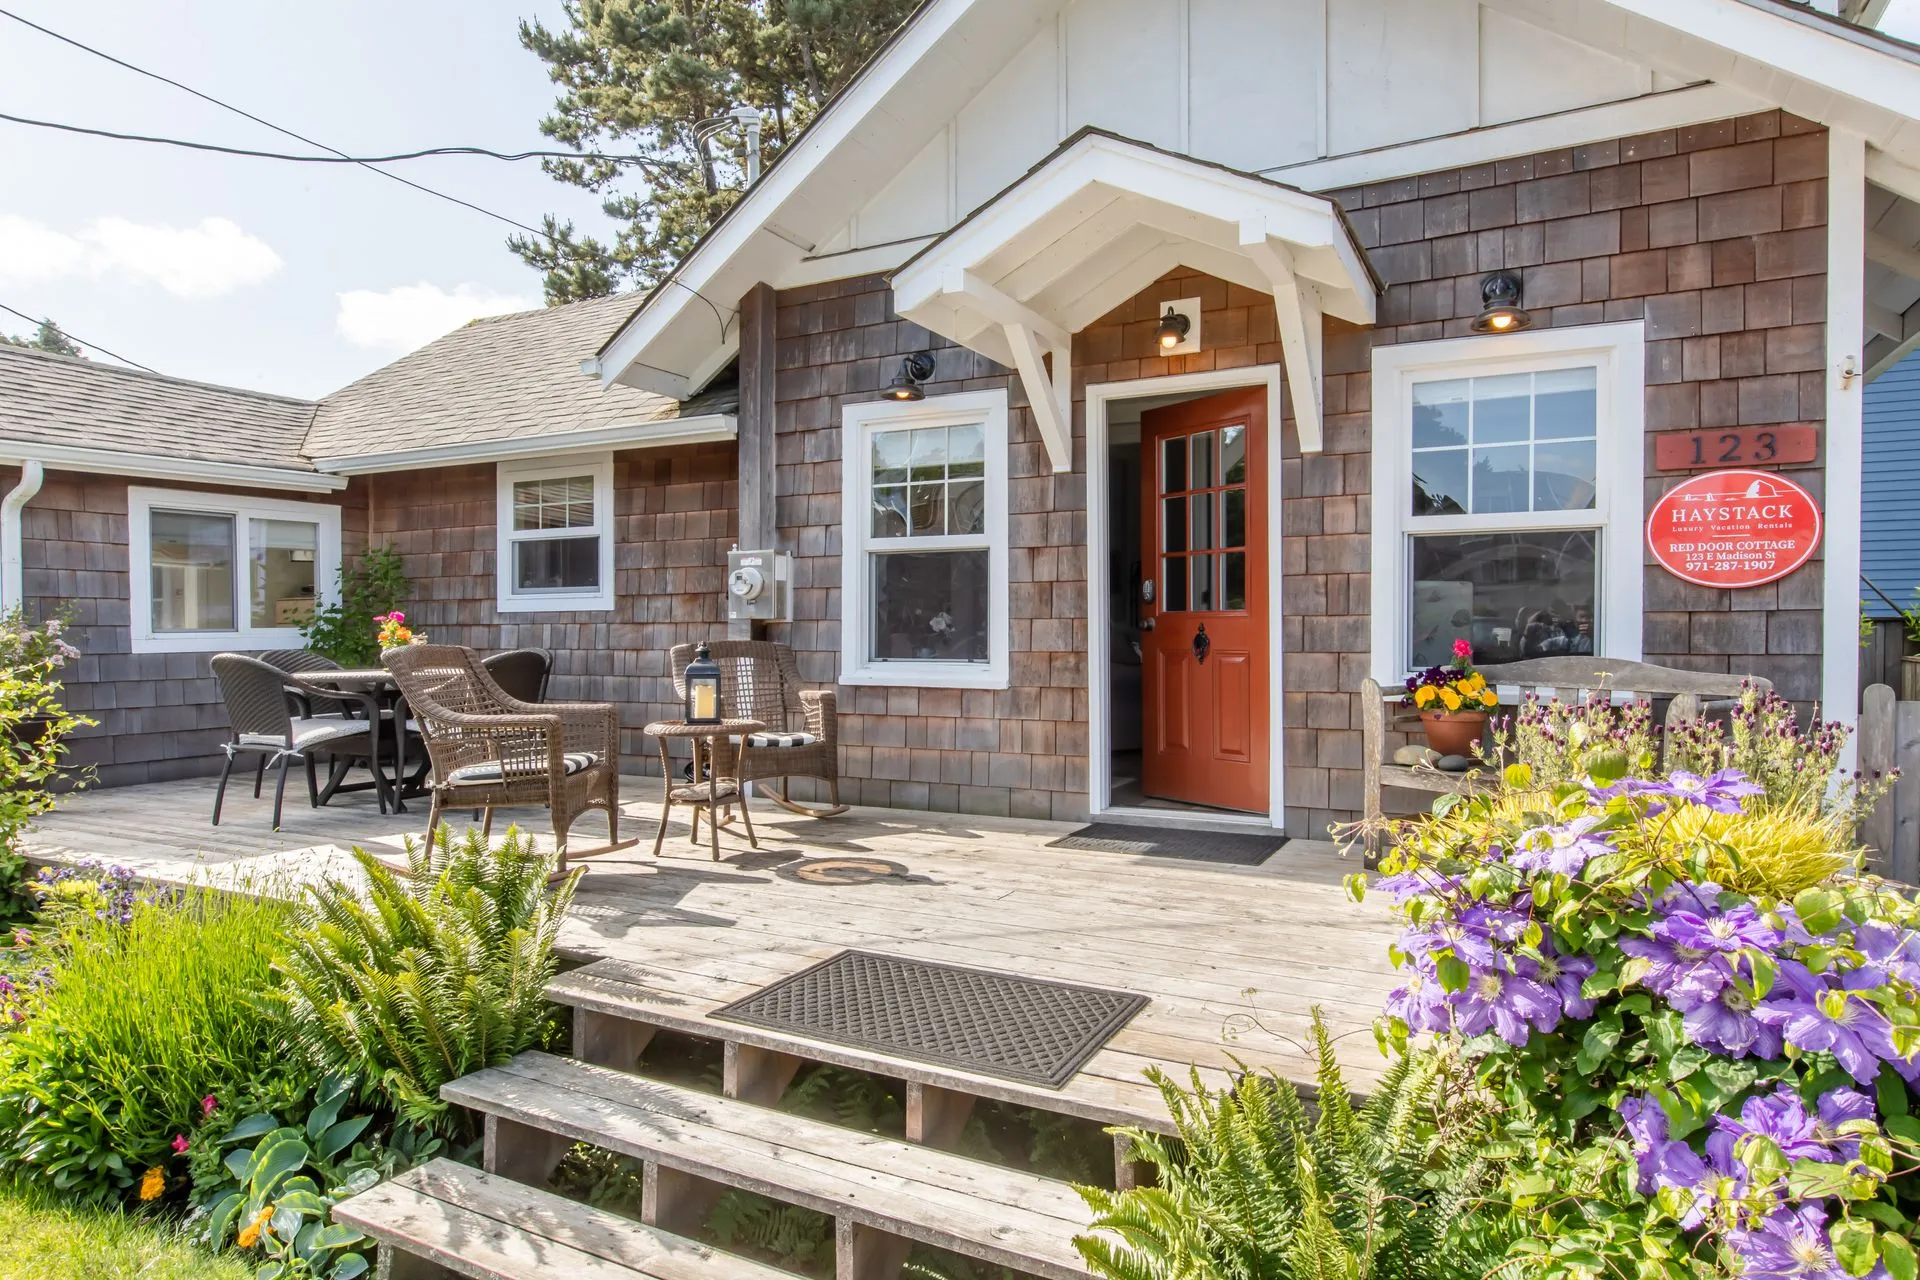 Vacation Rental in Cannon Beach, Red Door Cottage porch with chairs